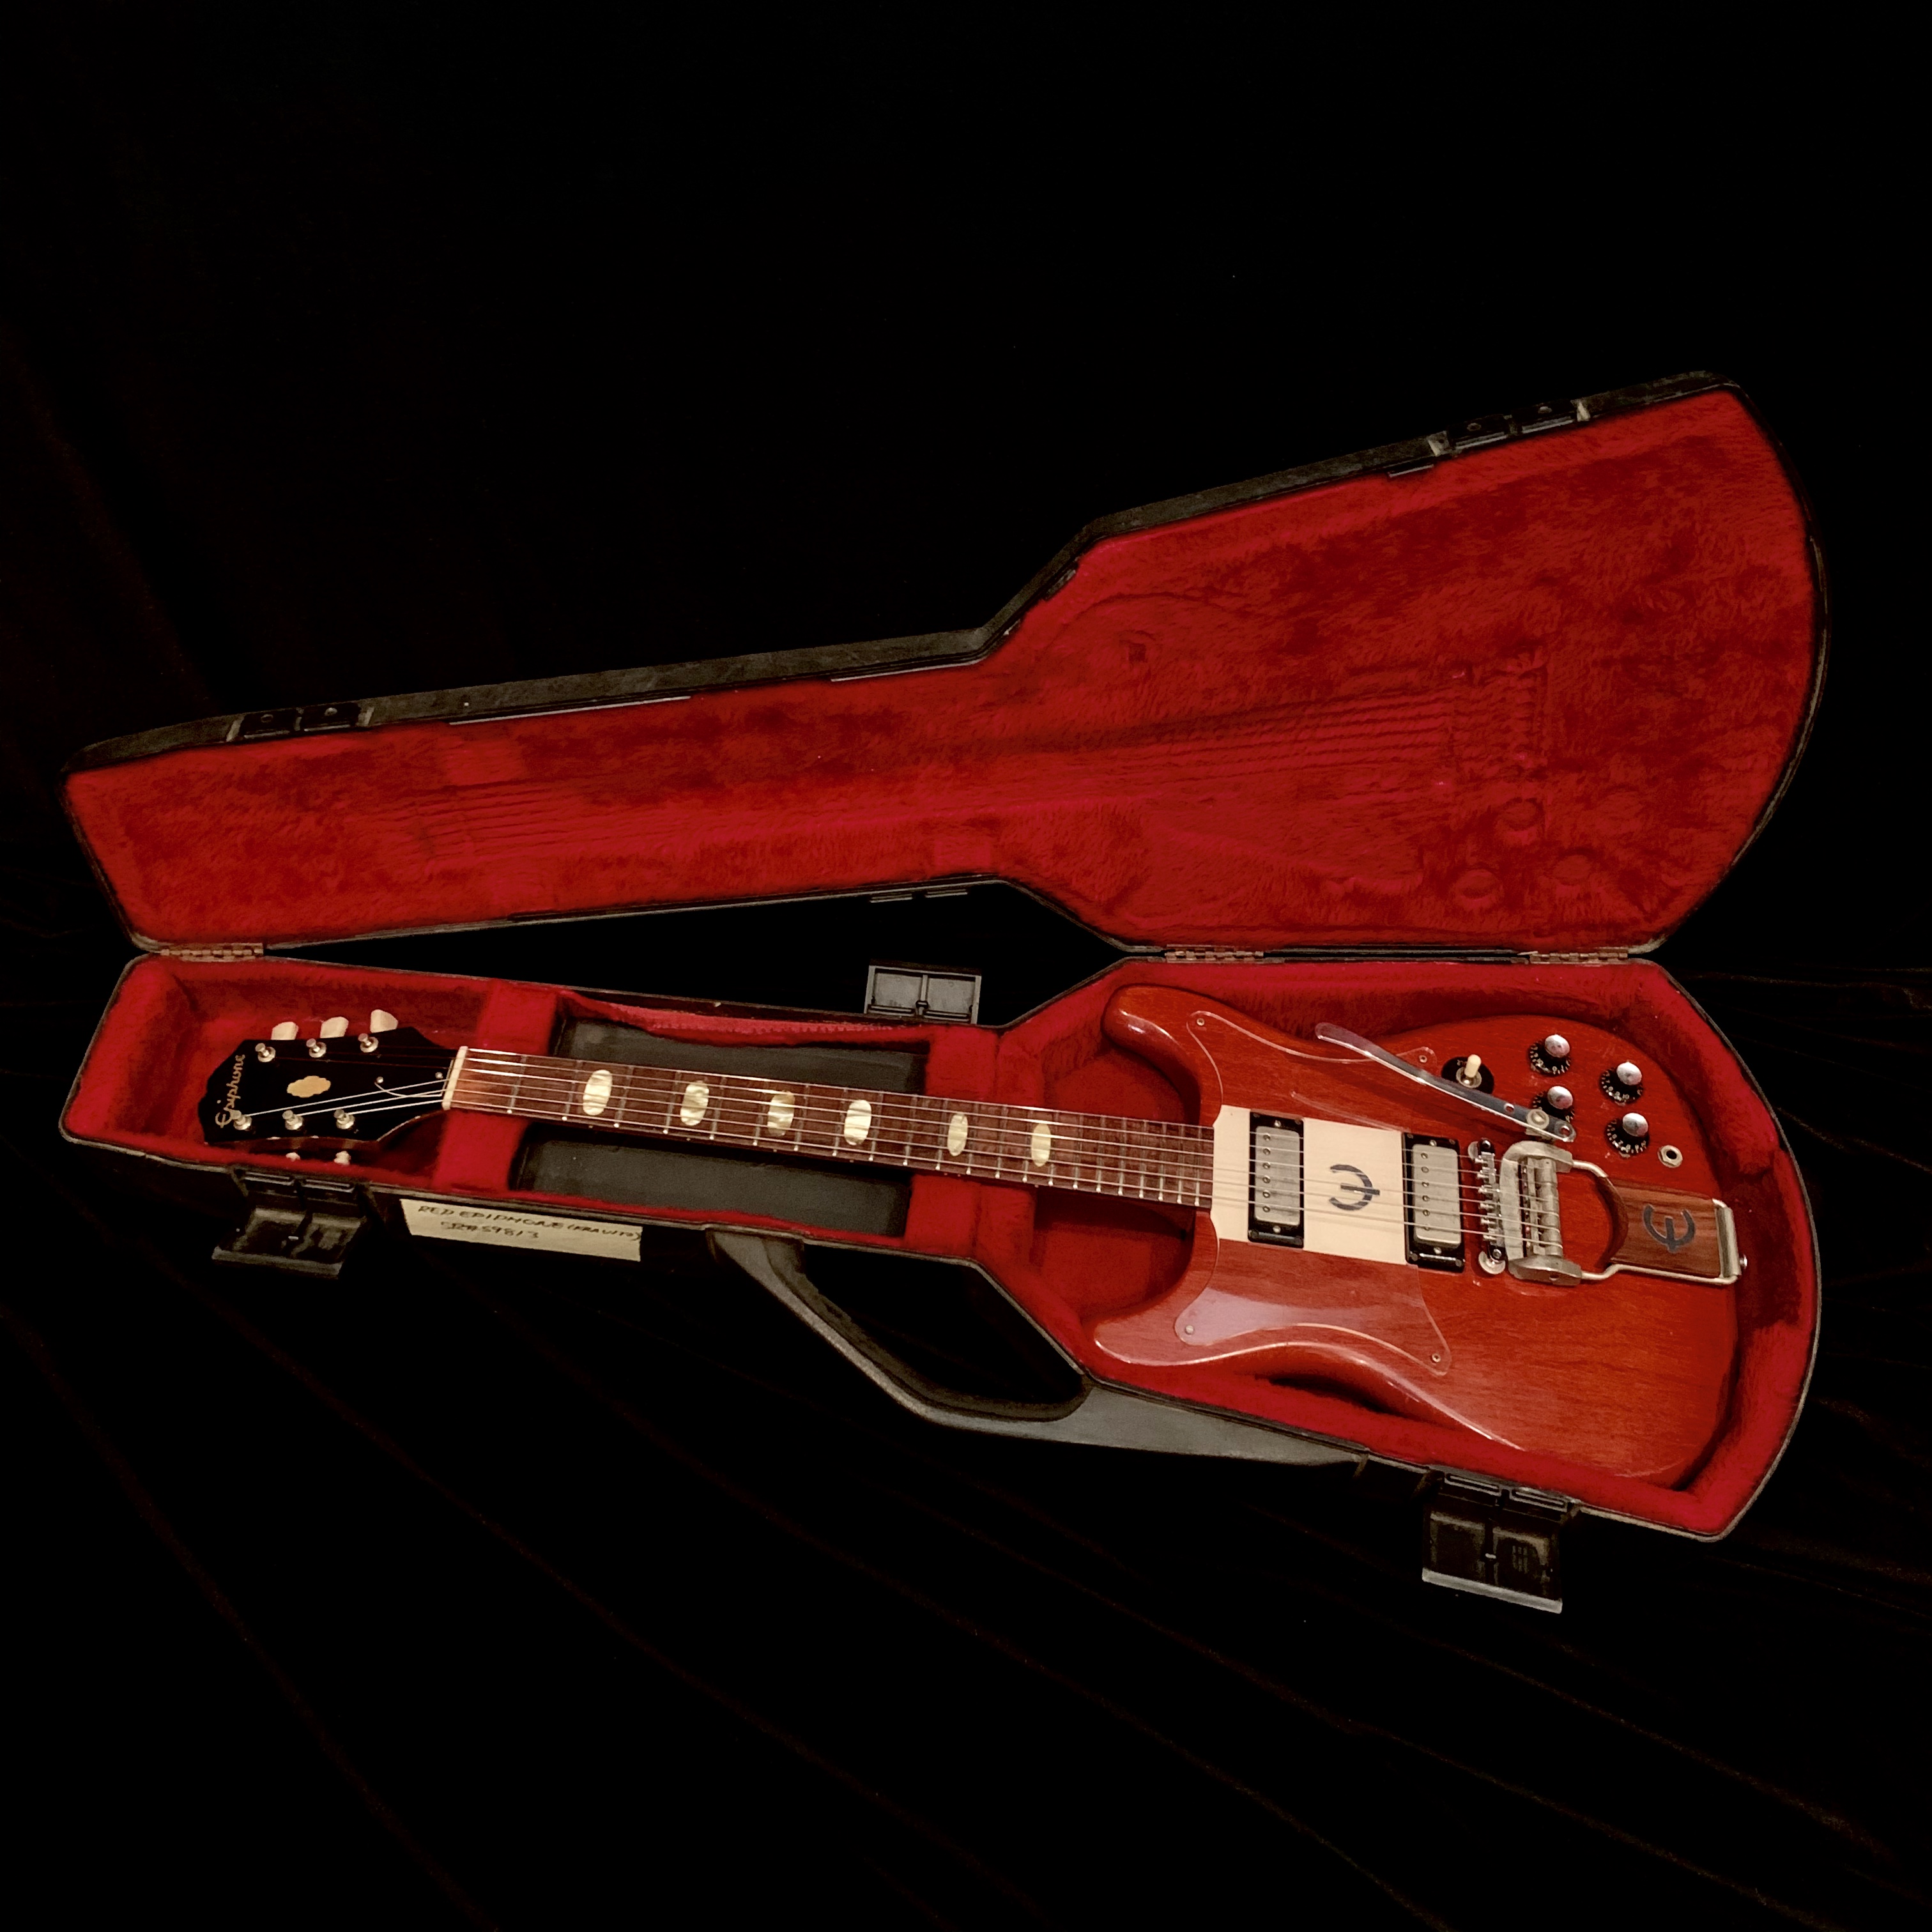 1962 Epiphone Crestwood Custom Cherry SN# 59813, From Lenny Kravitz's Personal Collection